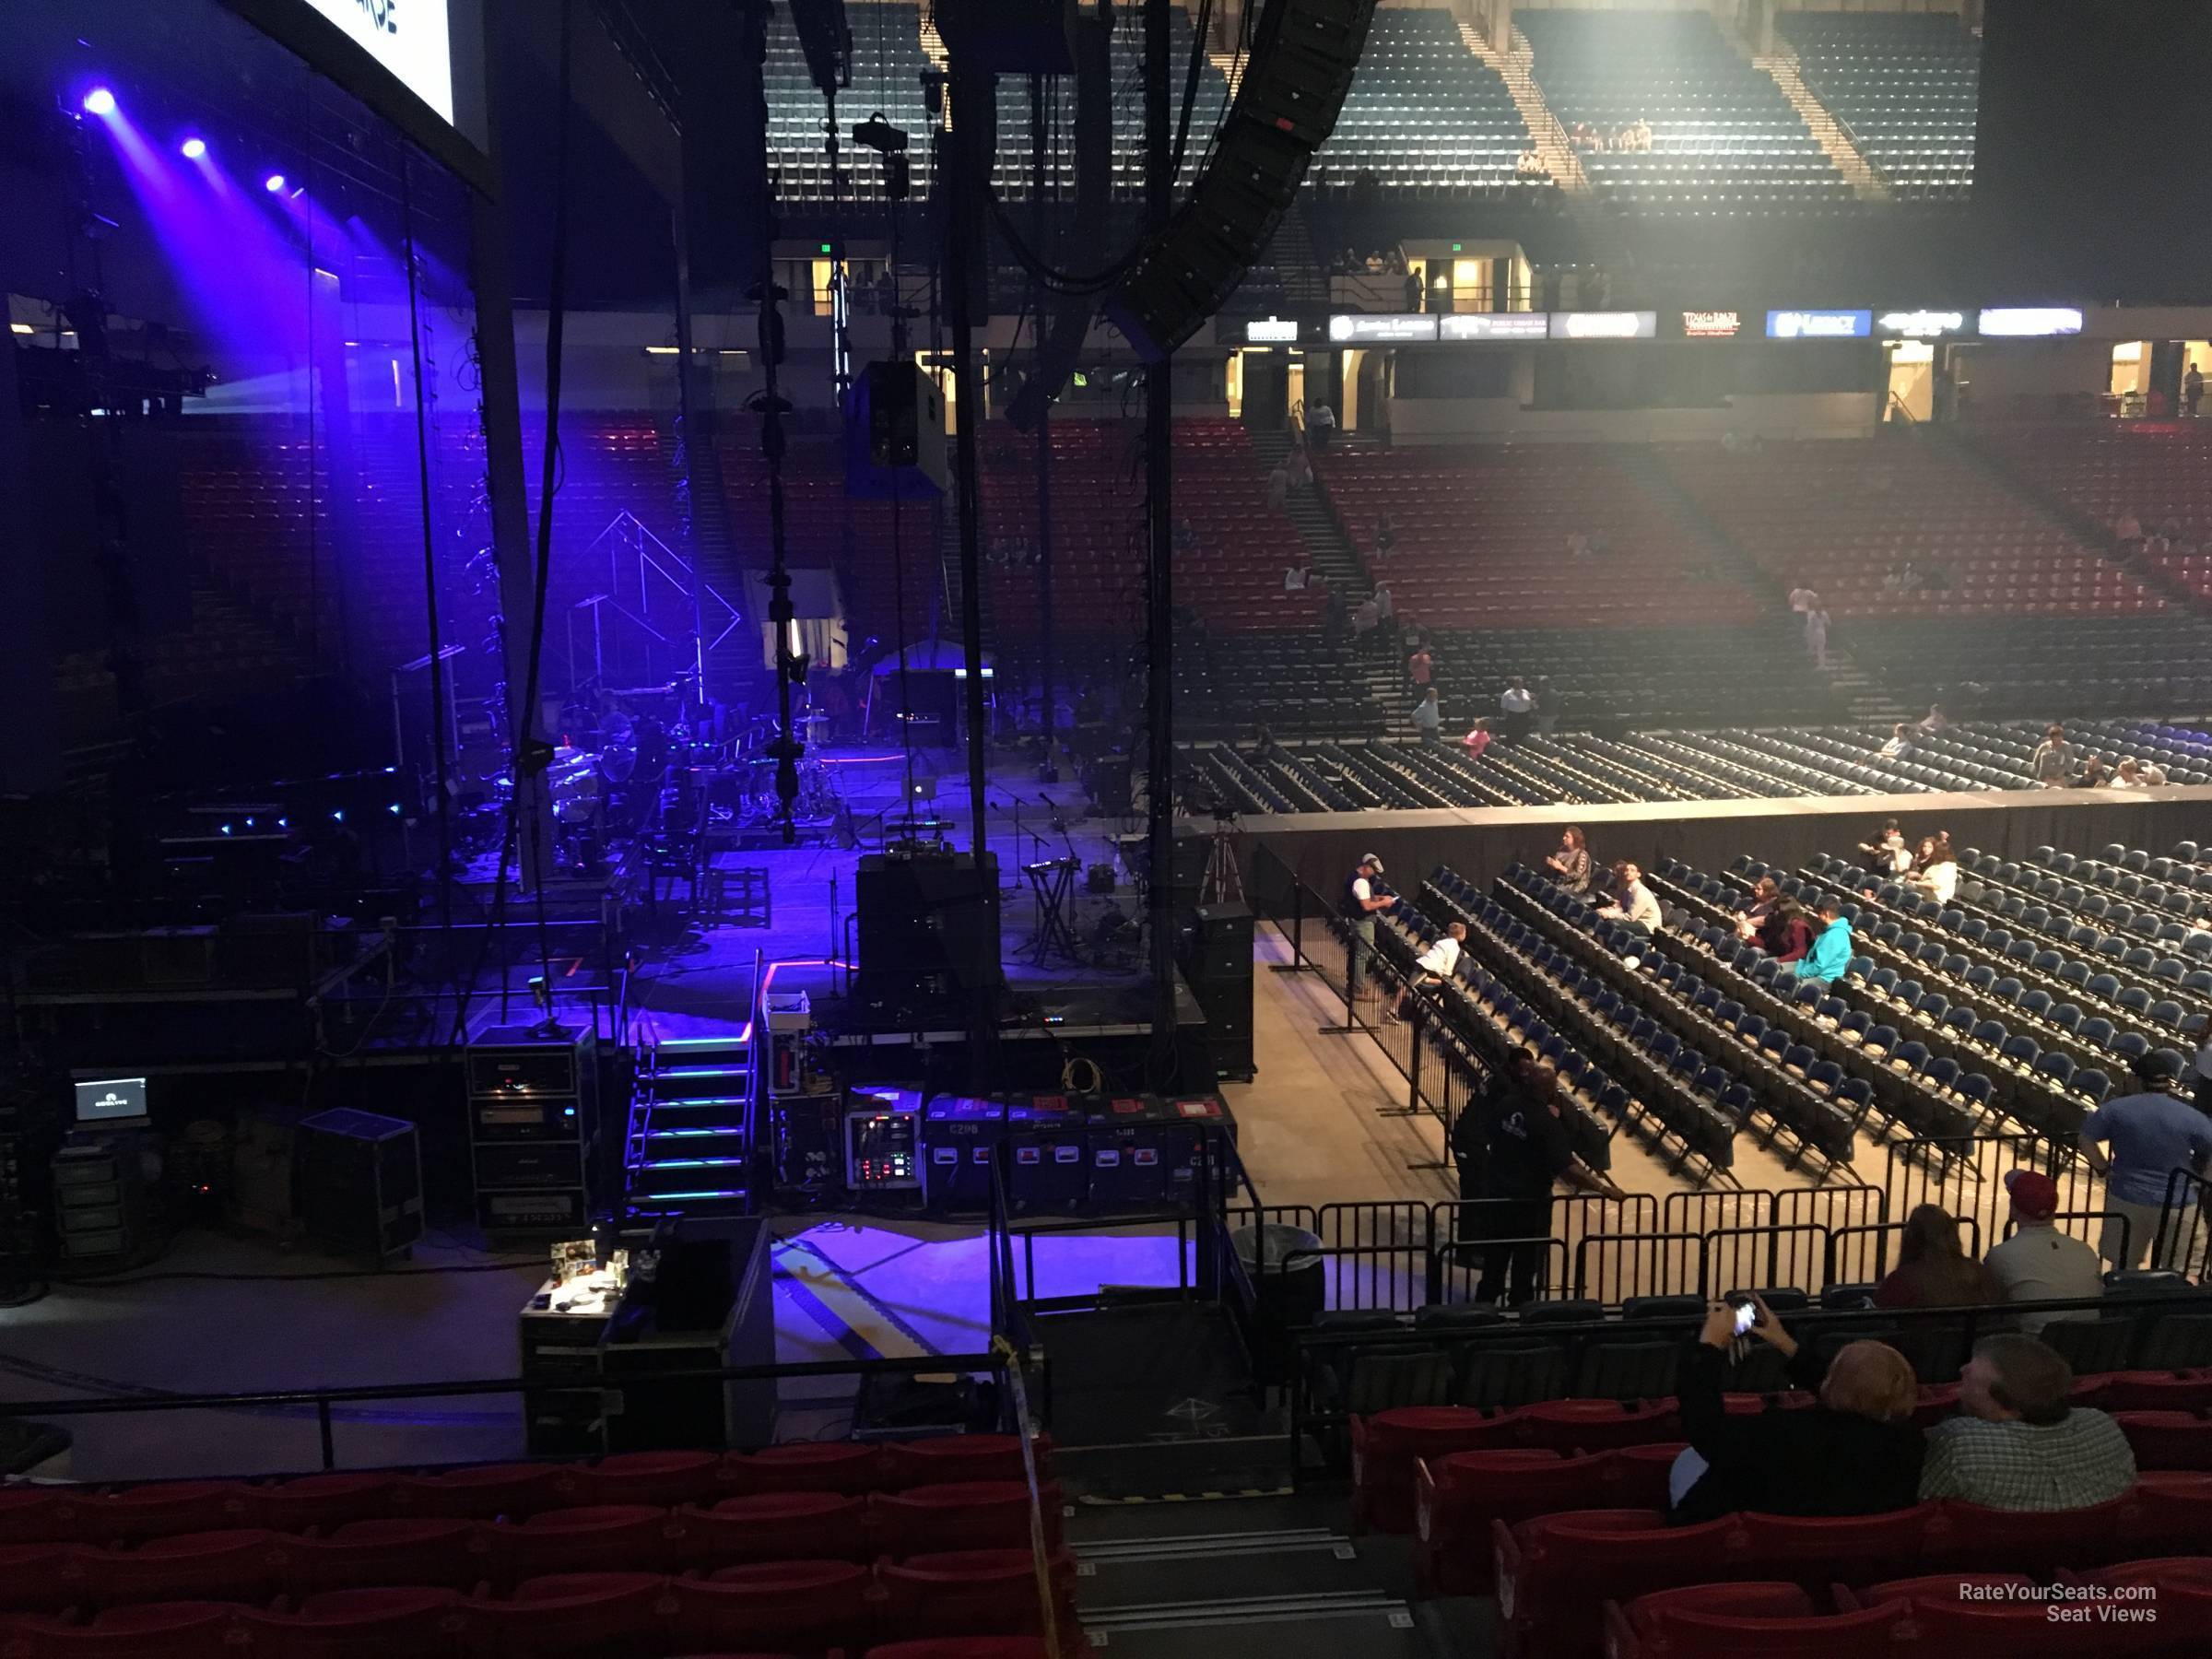 Bjcc Arena Seating Chart Rows